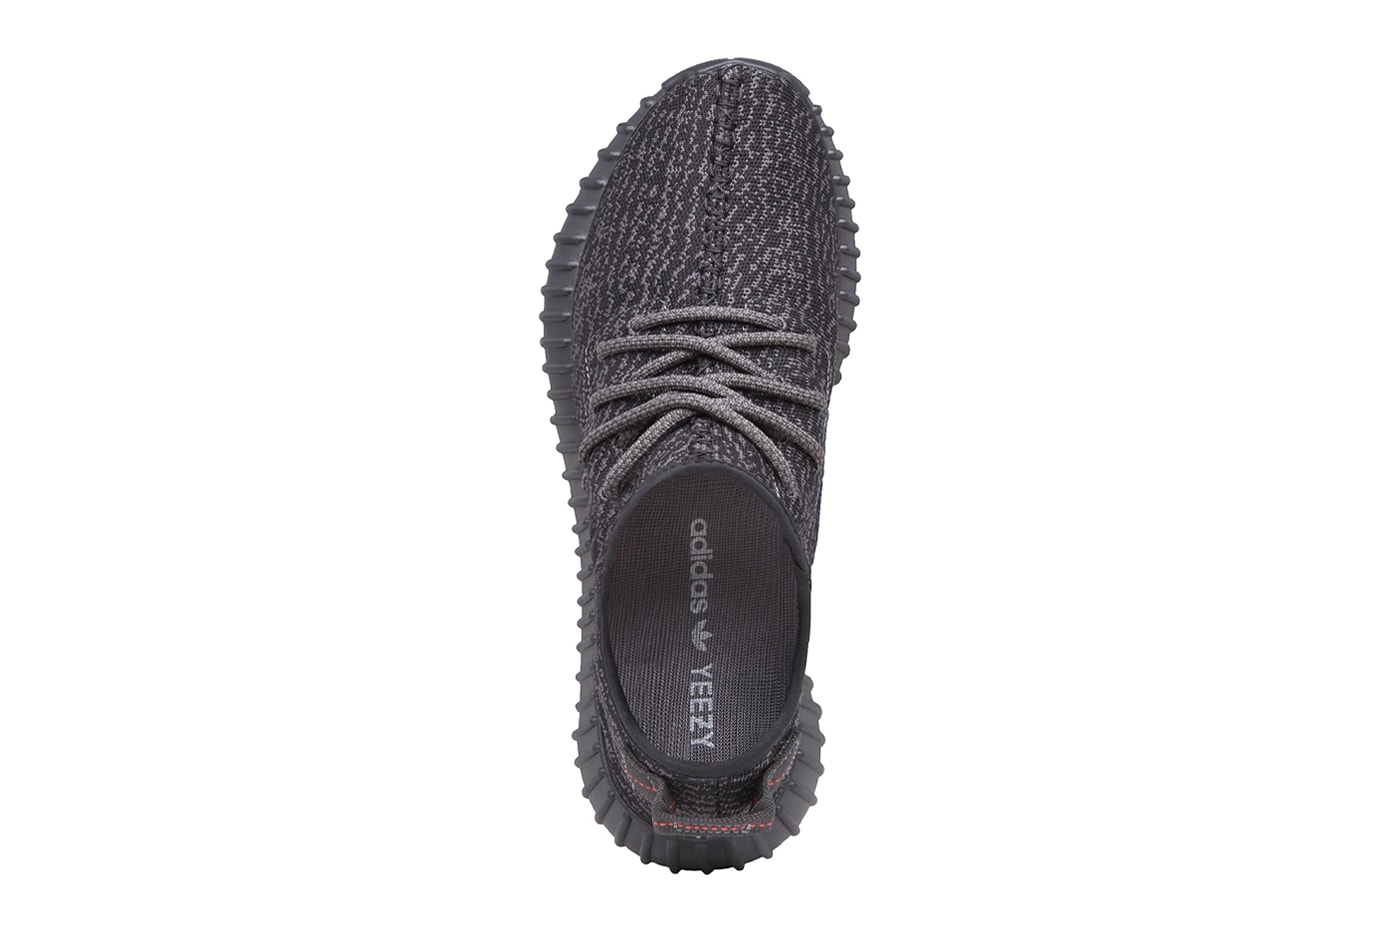 YEEZY BOOST 350 "Pirate Black" Receives Release Date |